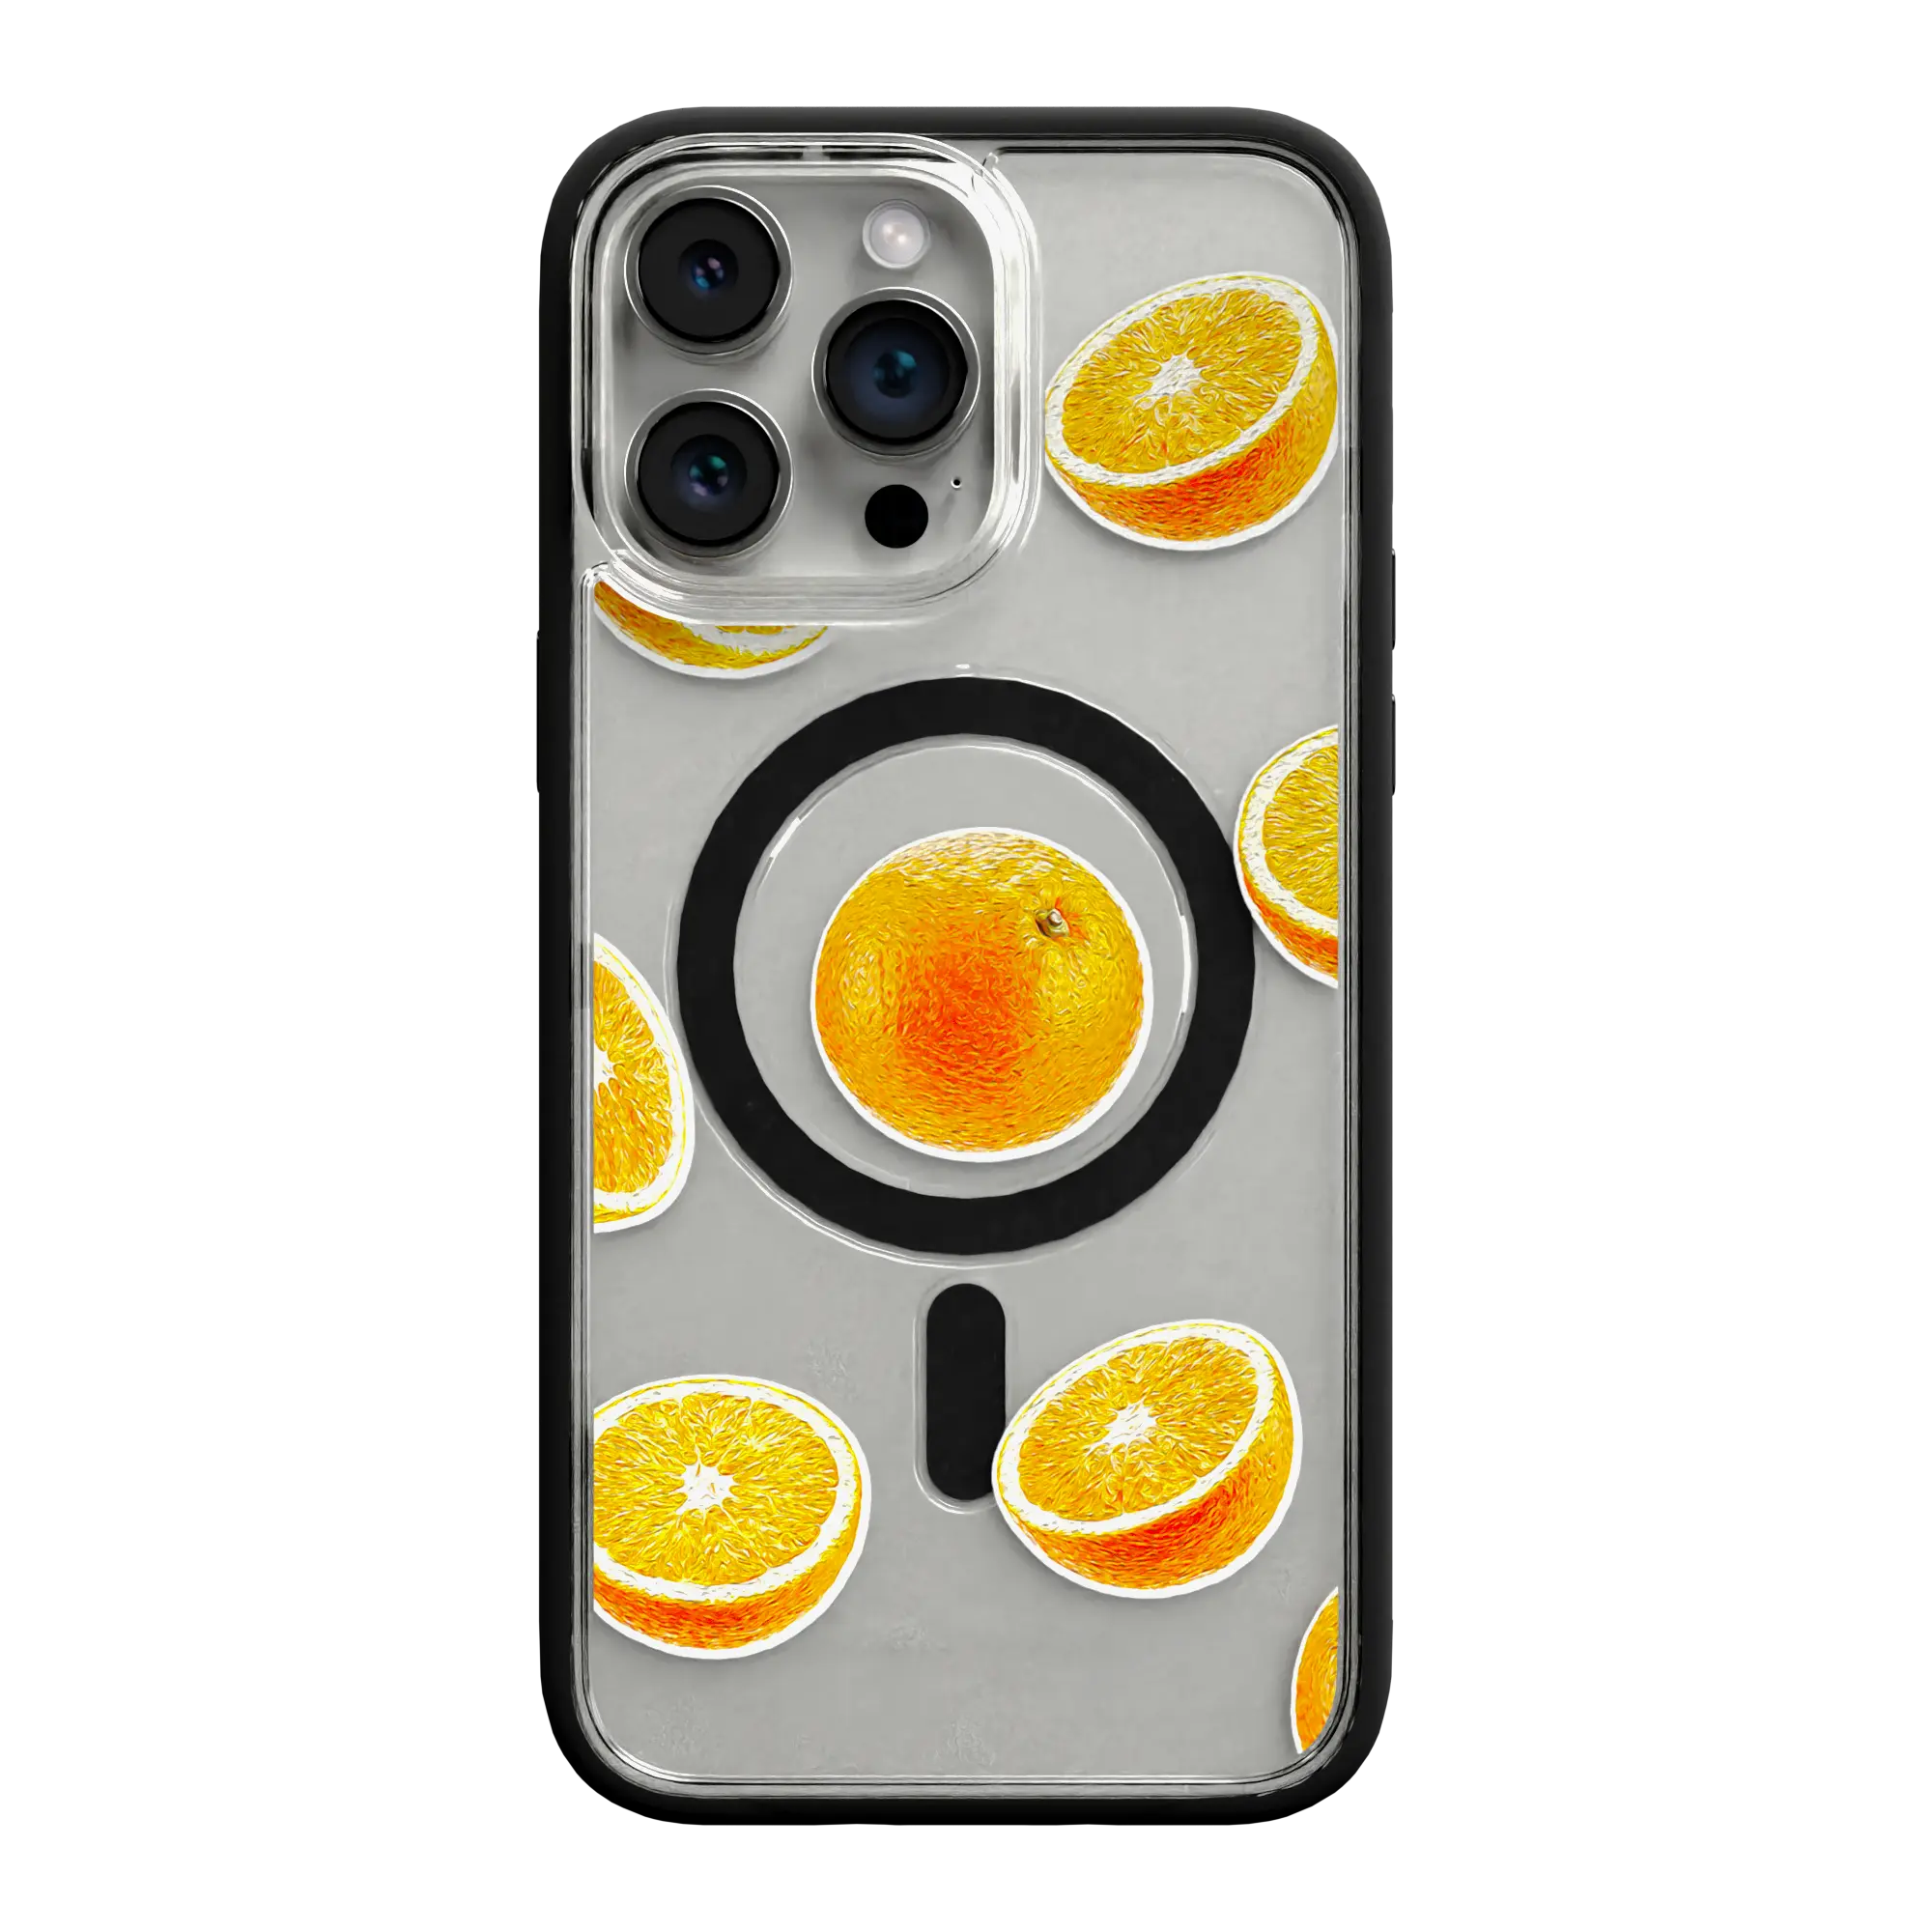 Apple-iPhone-12-Pro-Max-Crystal-Clear Orange Zest | Protective MagSafe Case | Fruits Collection for Apple iPhone 12 Series cellhelmet cellhelmet